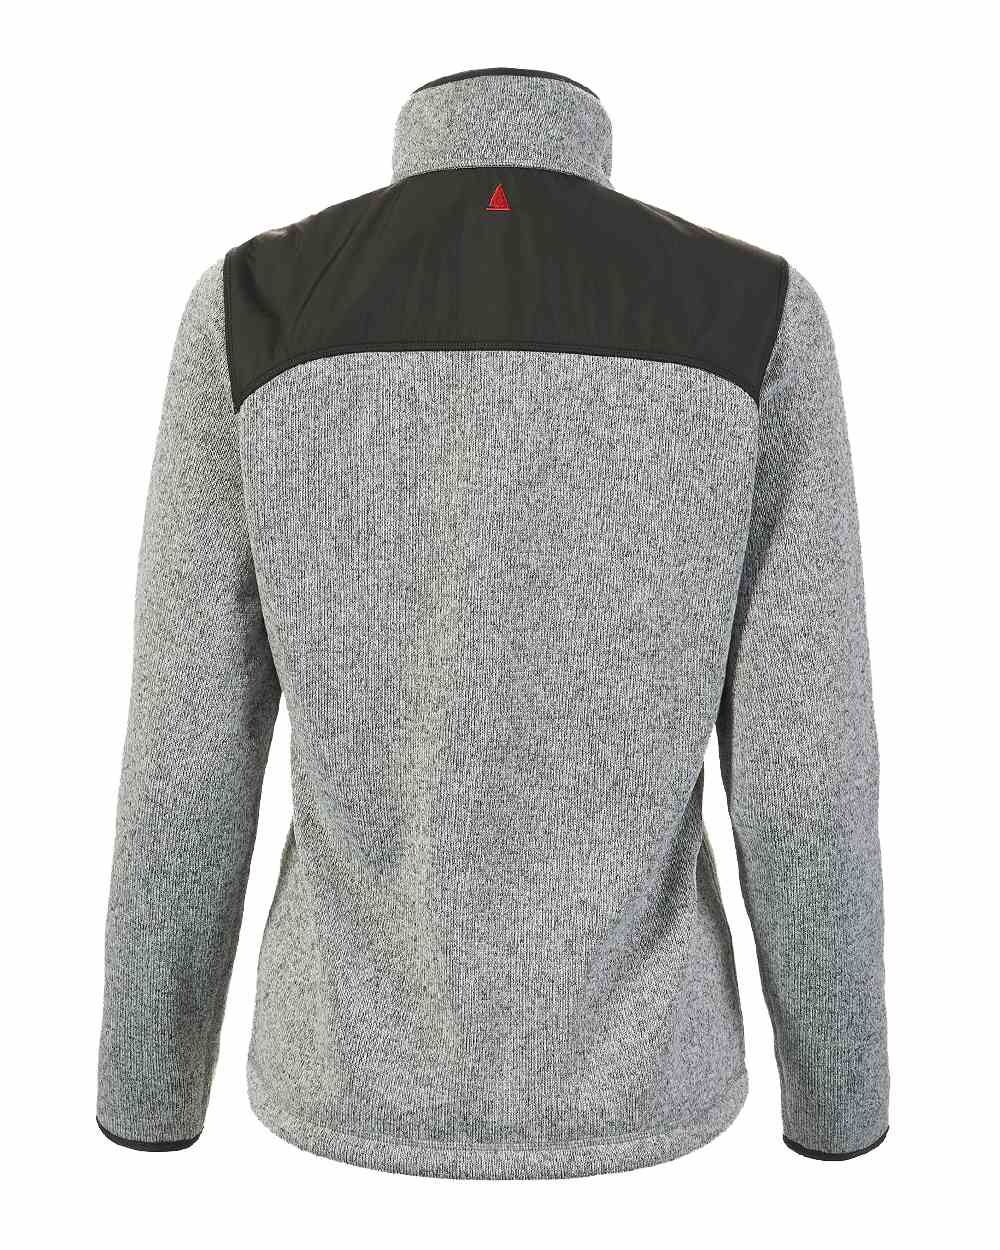 Grey Melange Coloured Musto Womens Knitted Fleece On A White Background 